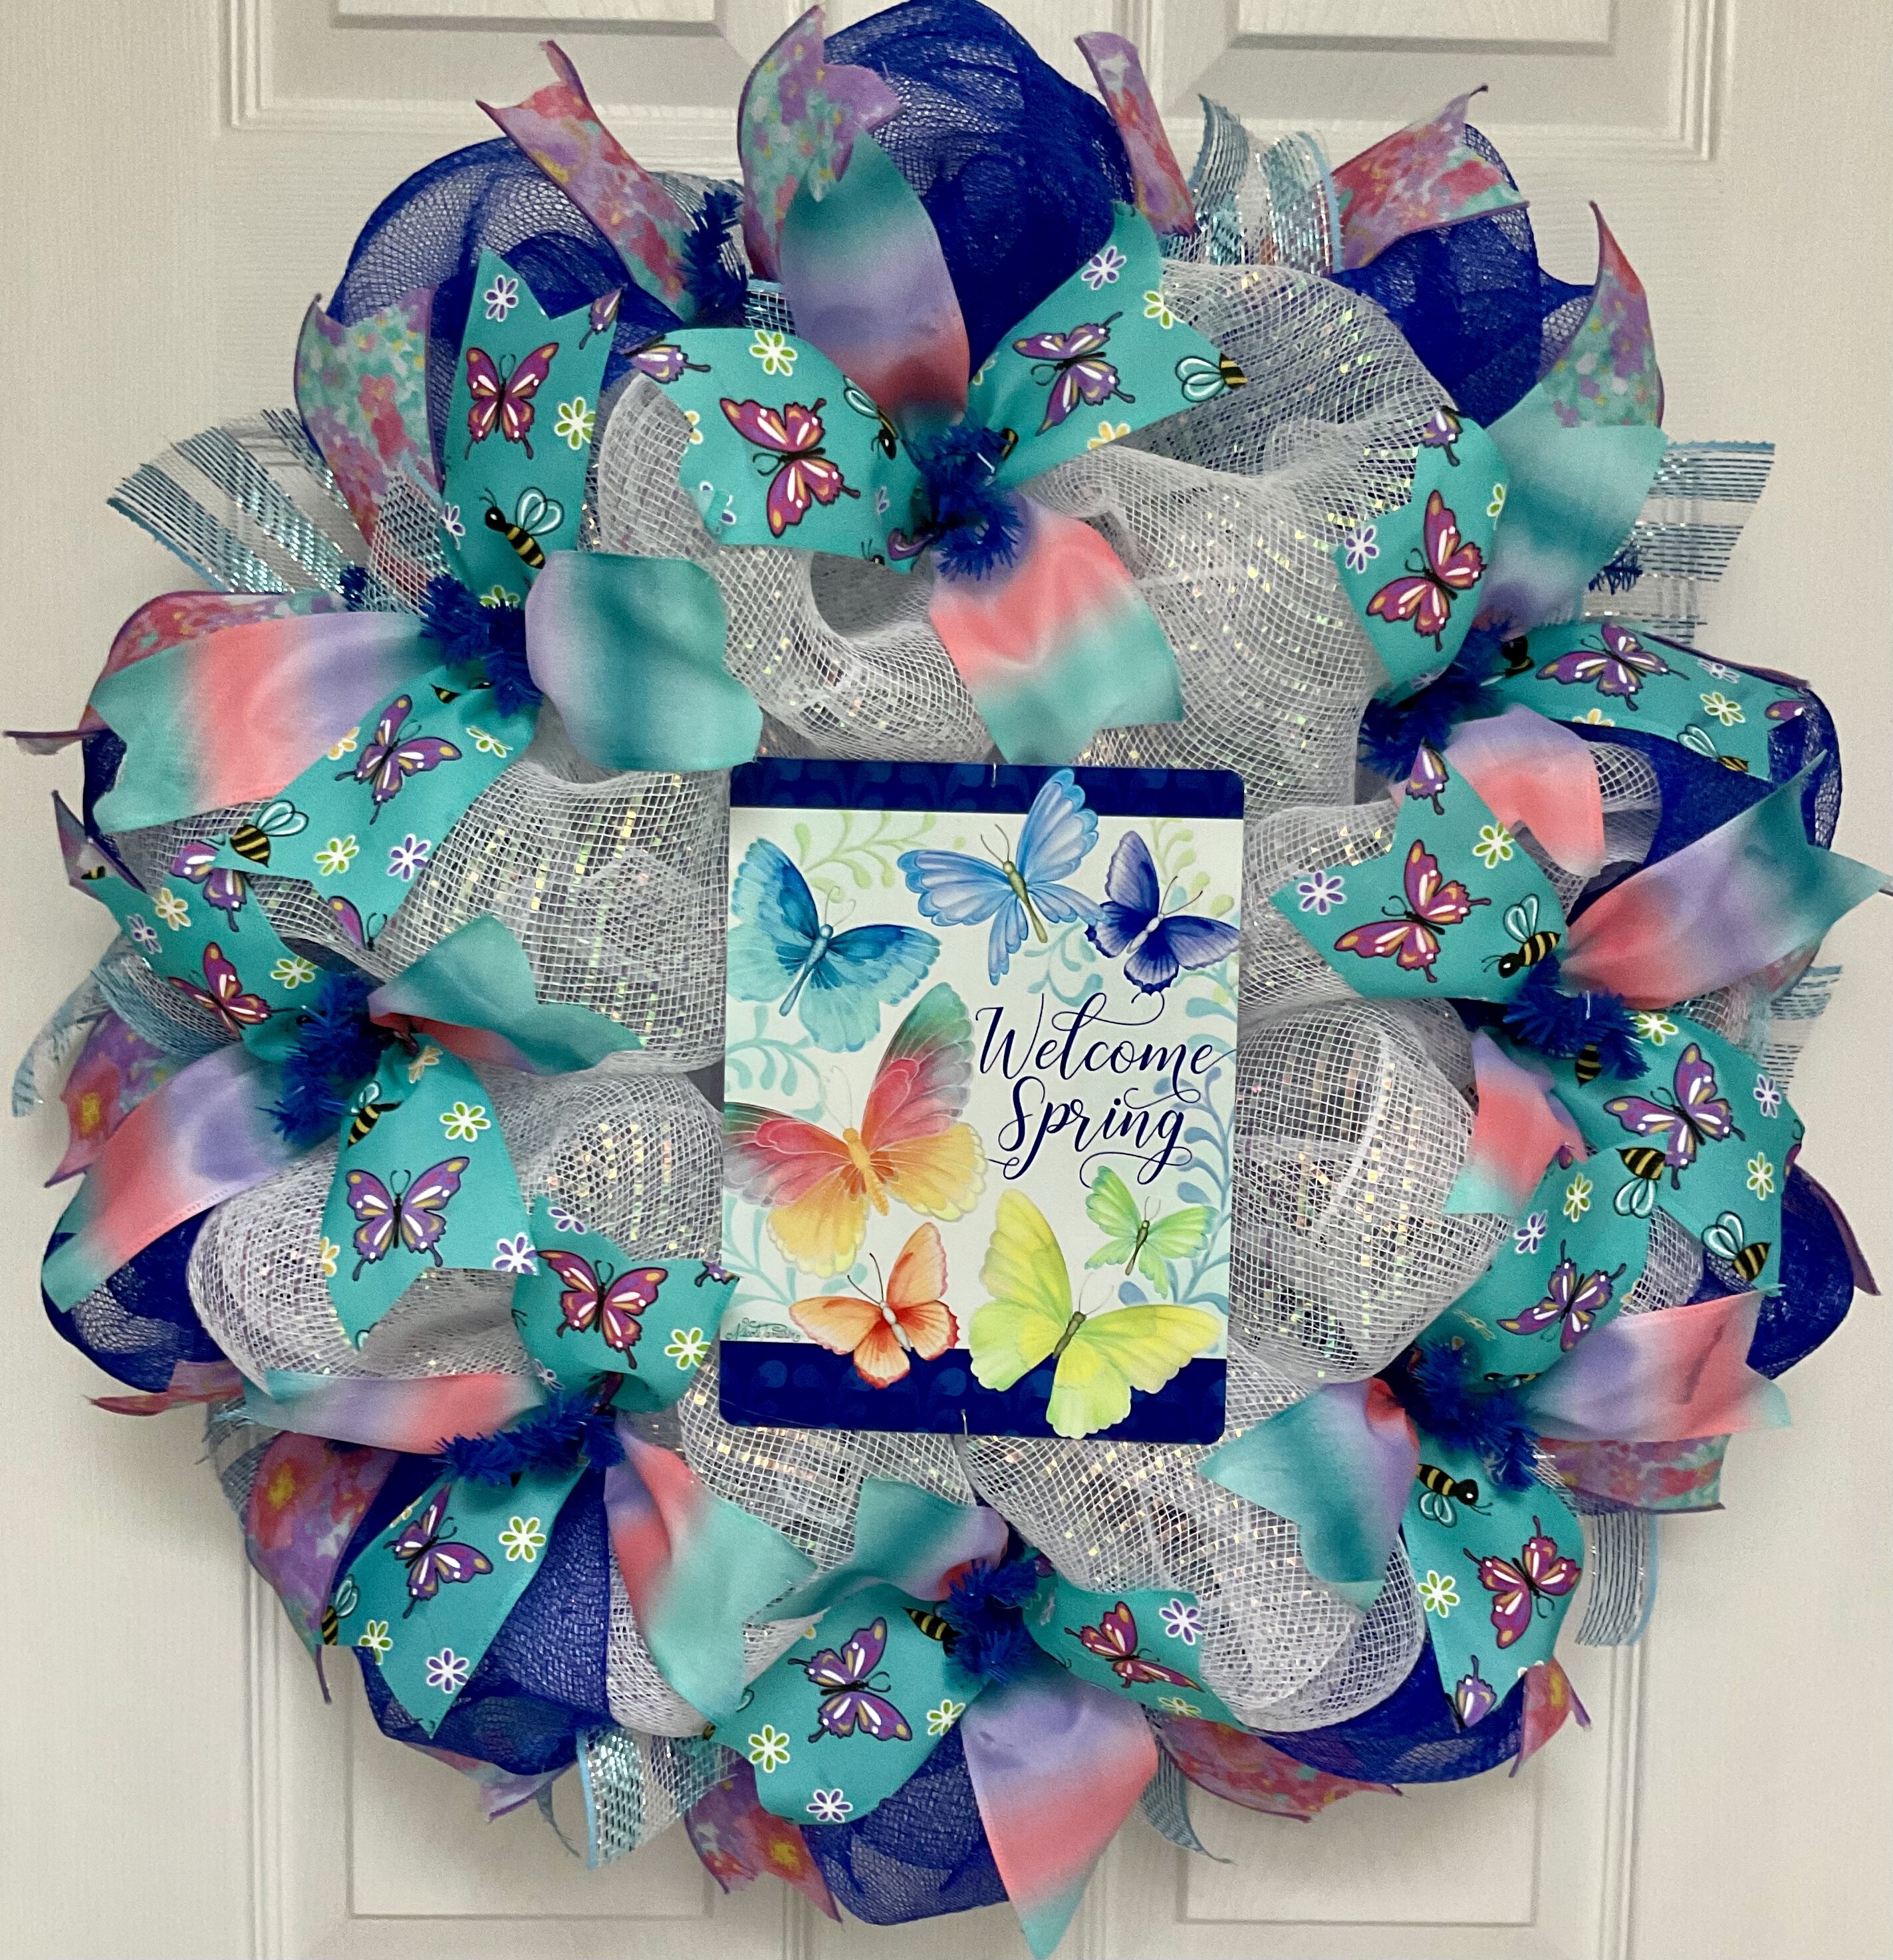 Welcome Mesh Wreath pastel colors homemade GORGEOUS SPRING 